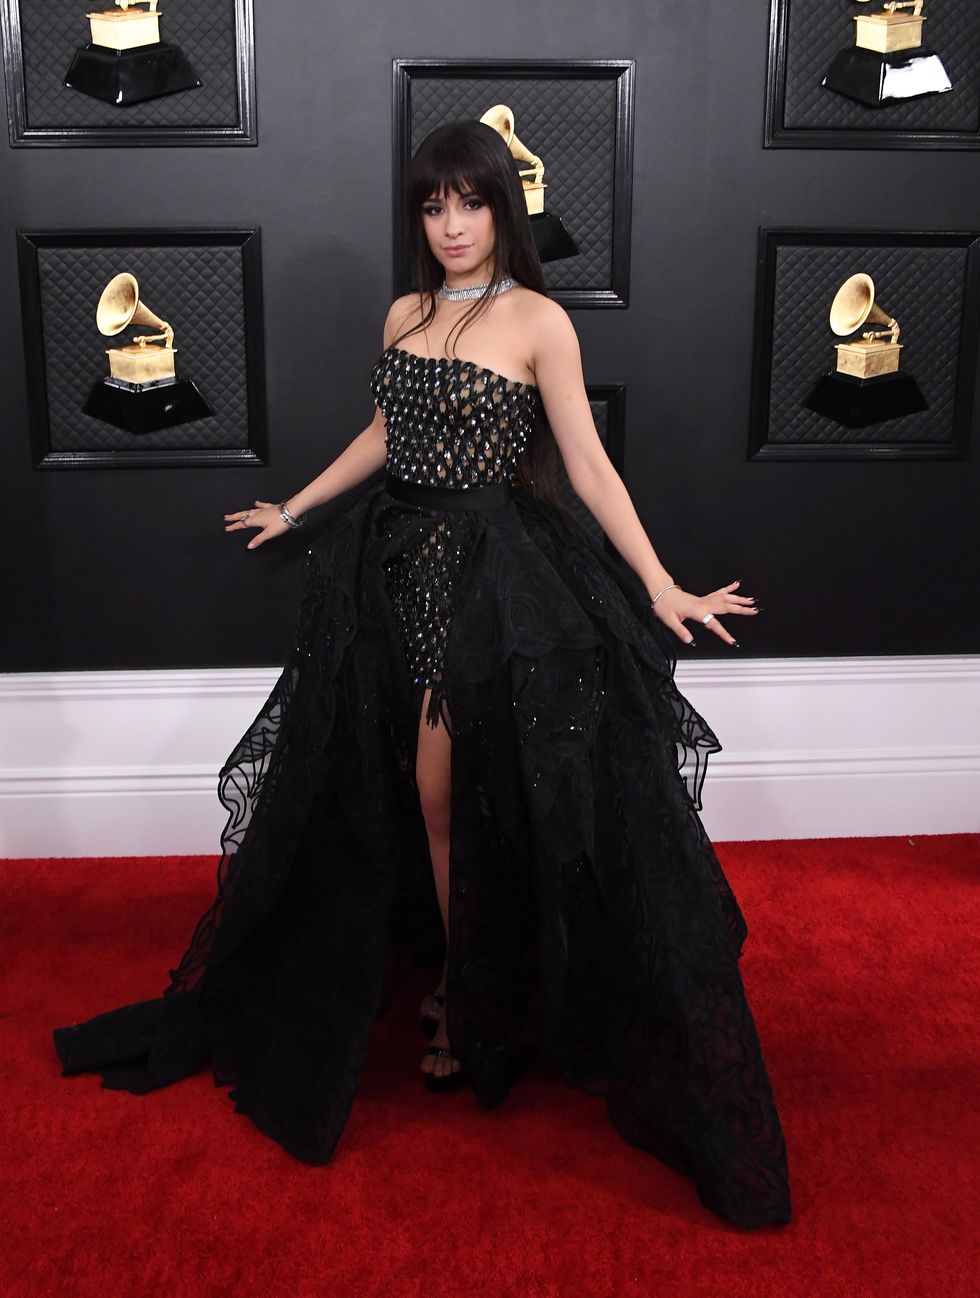 camila-cabello-attends-the-62nd-annual-grammy-awards-at-news-photo-1580085813.jpg